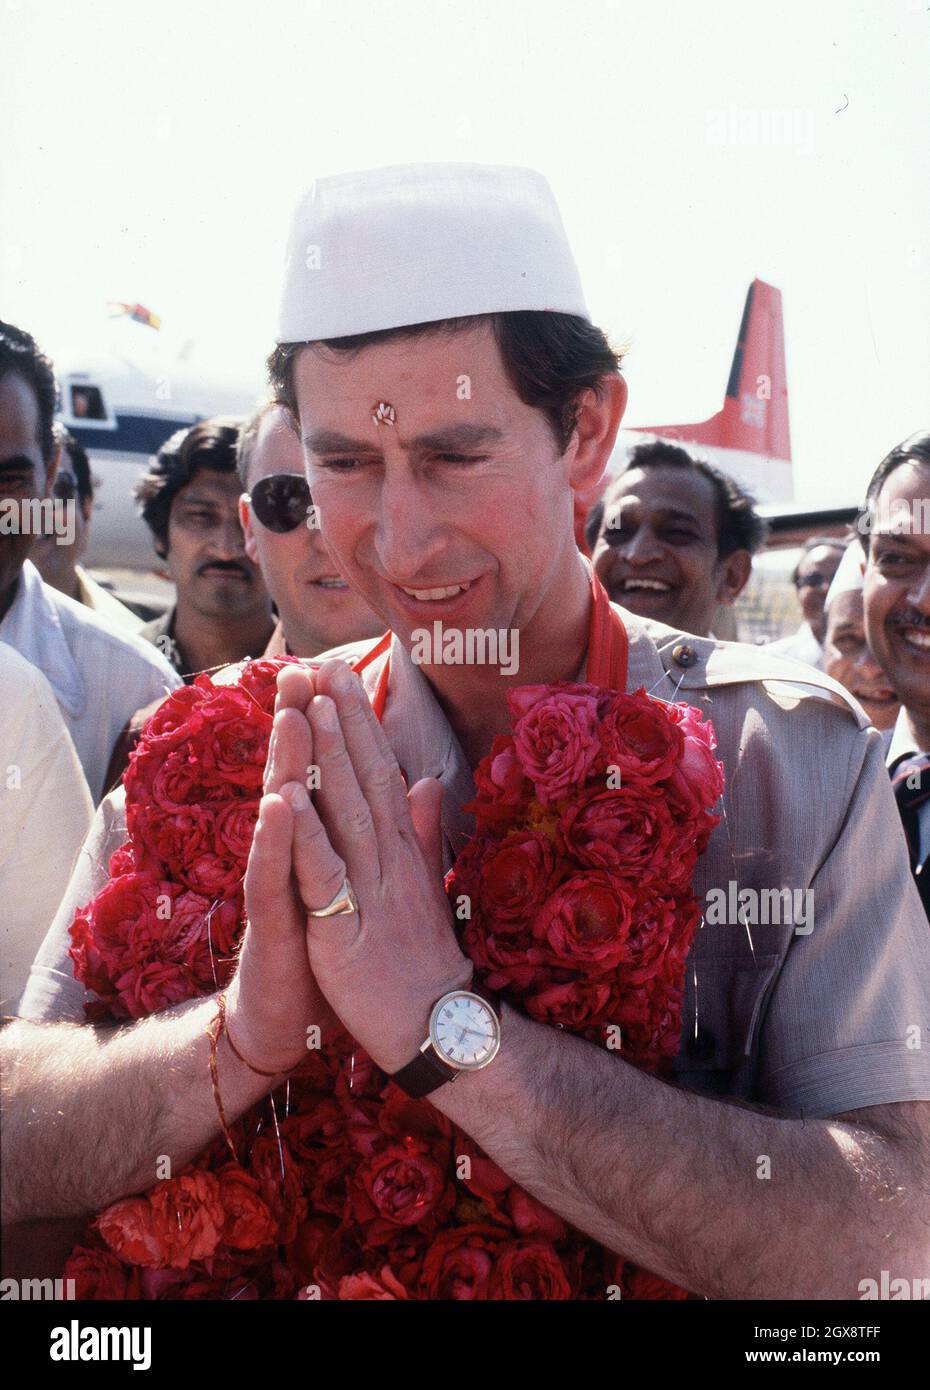 The Prince of Wales, appropriately garbed and garlanded, arrives in India in 1980. Anwar Hussein/allactiondigital.com  Stock Photo